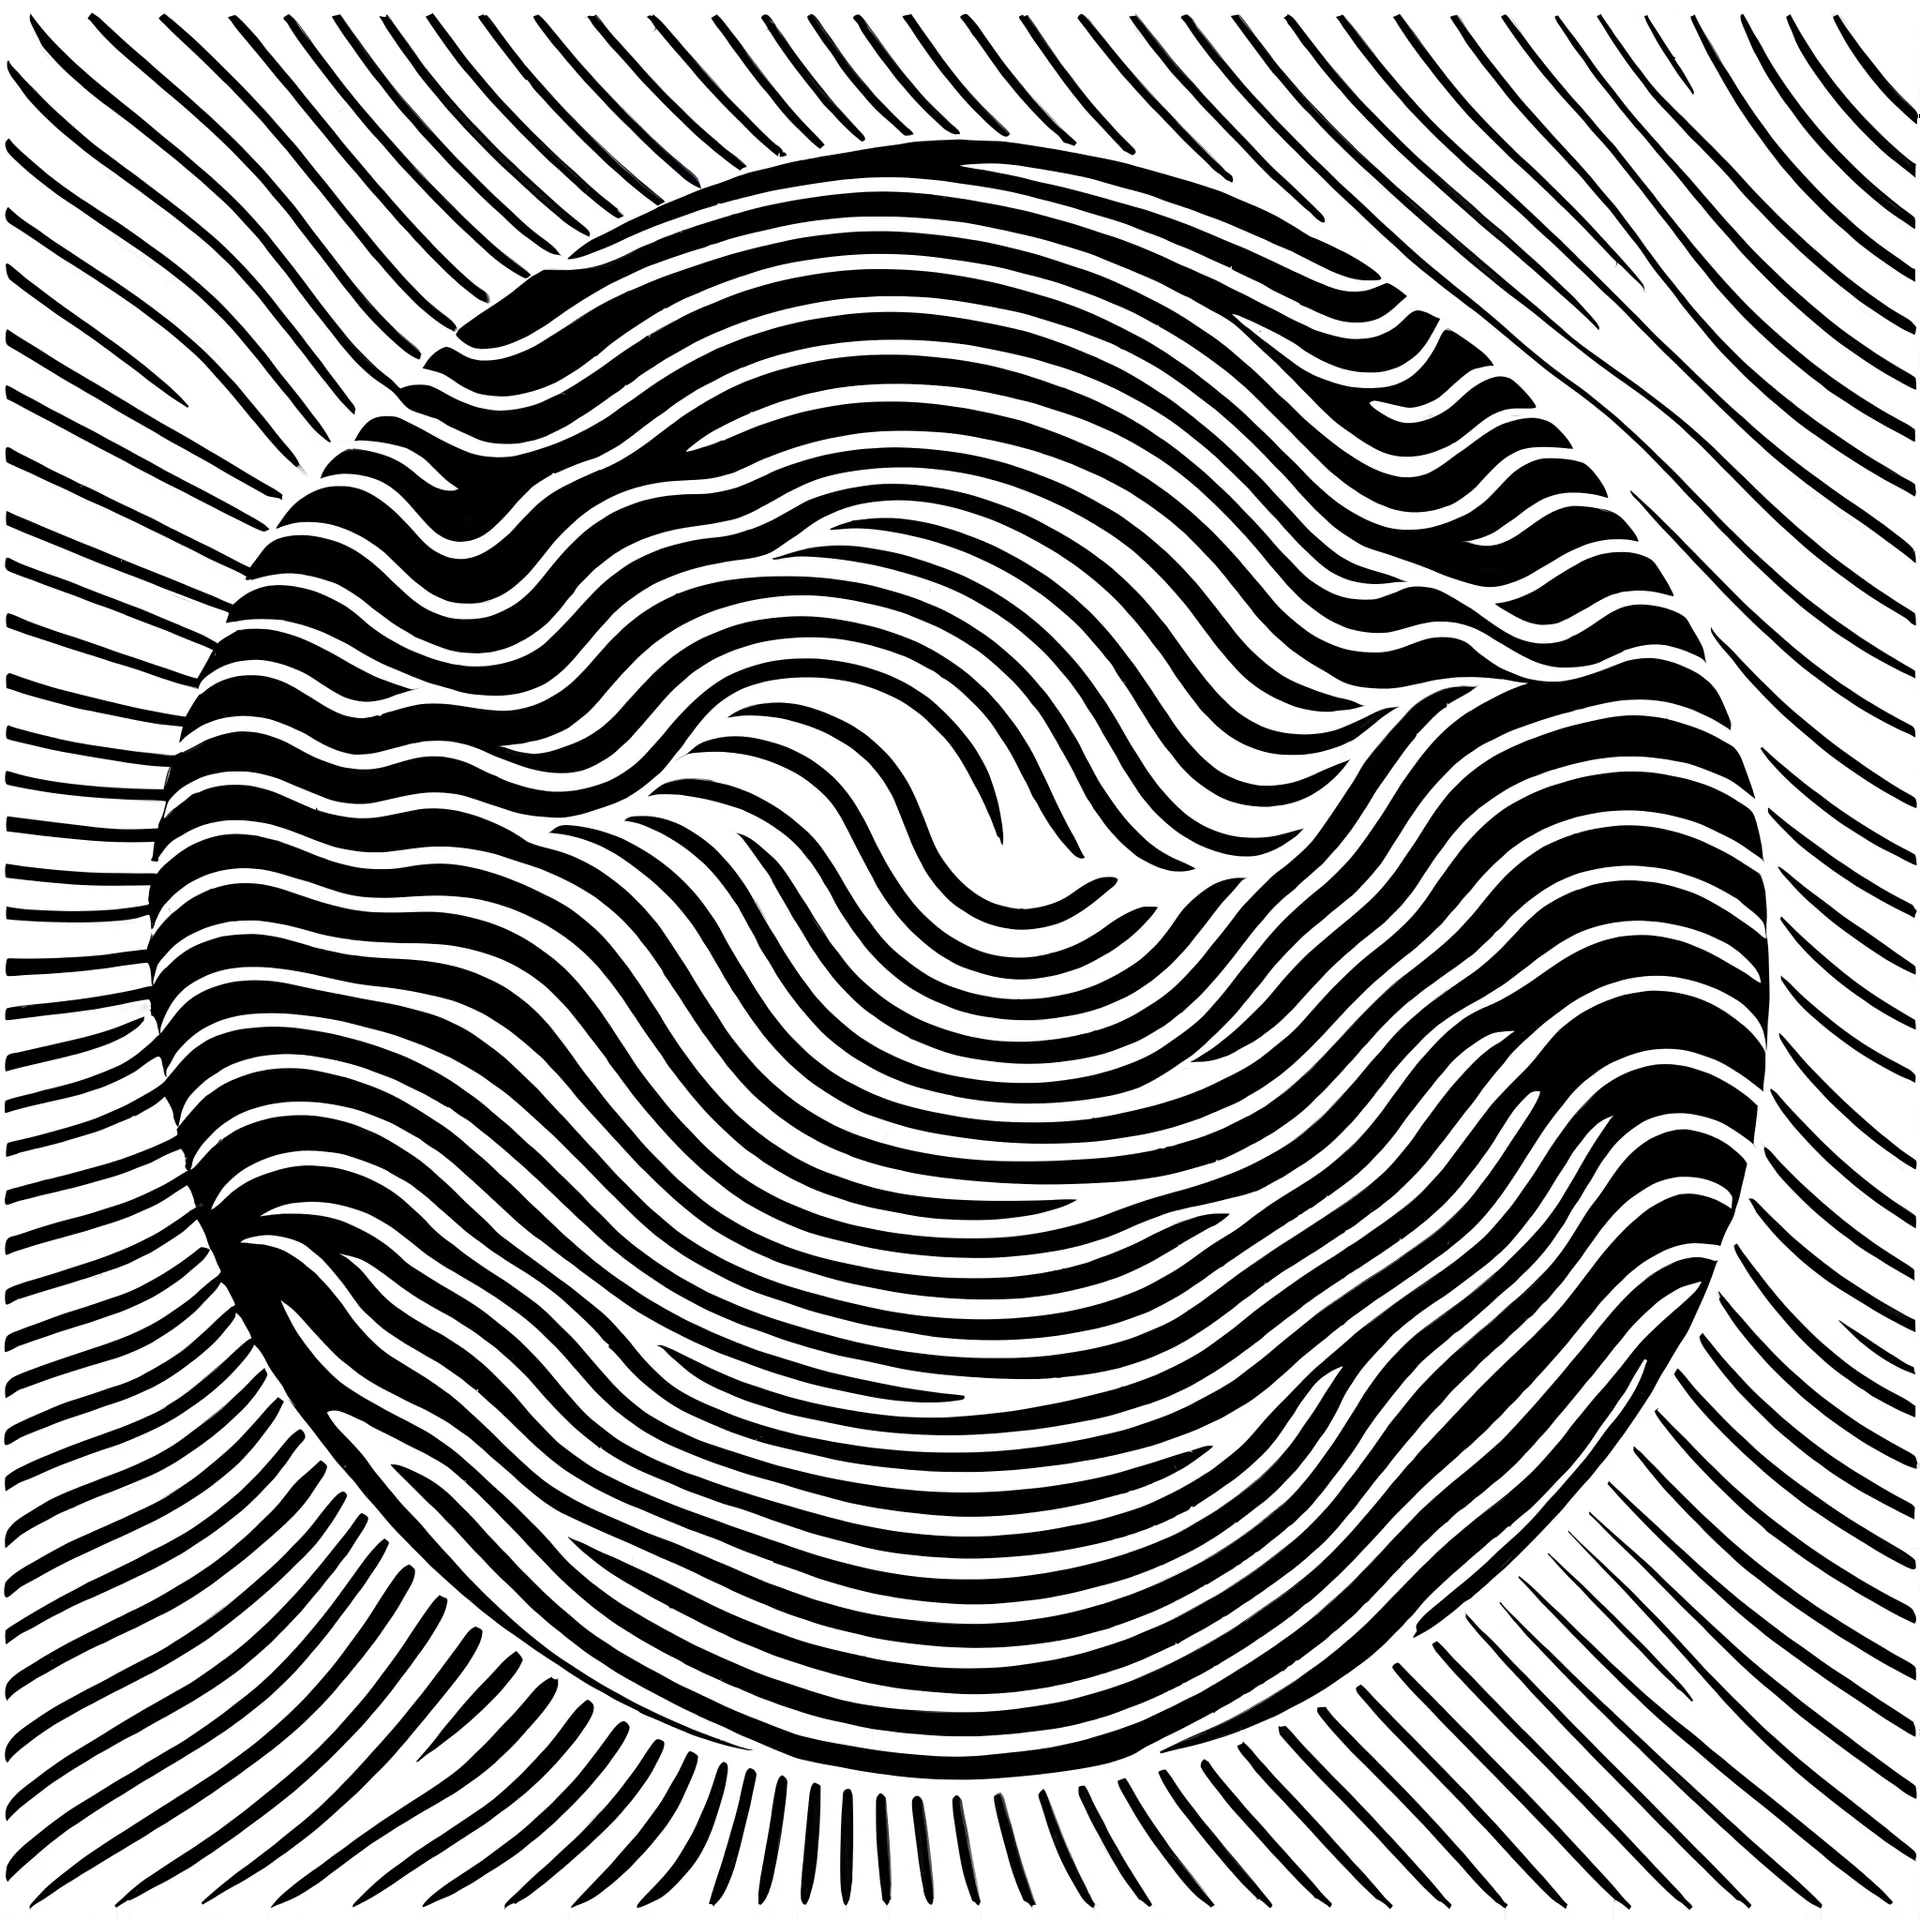 A stream of thoughts, black waves on a white background in a circle, logo, minimalism,fewer stripes